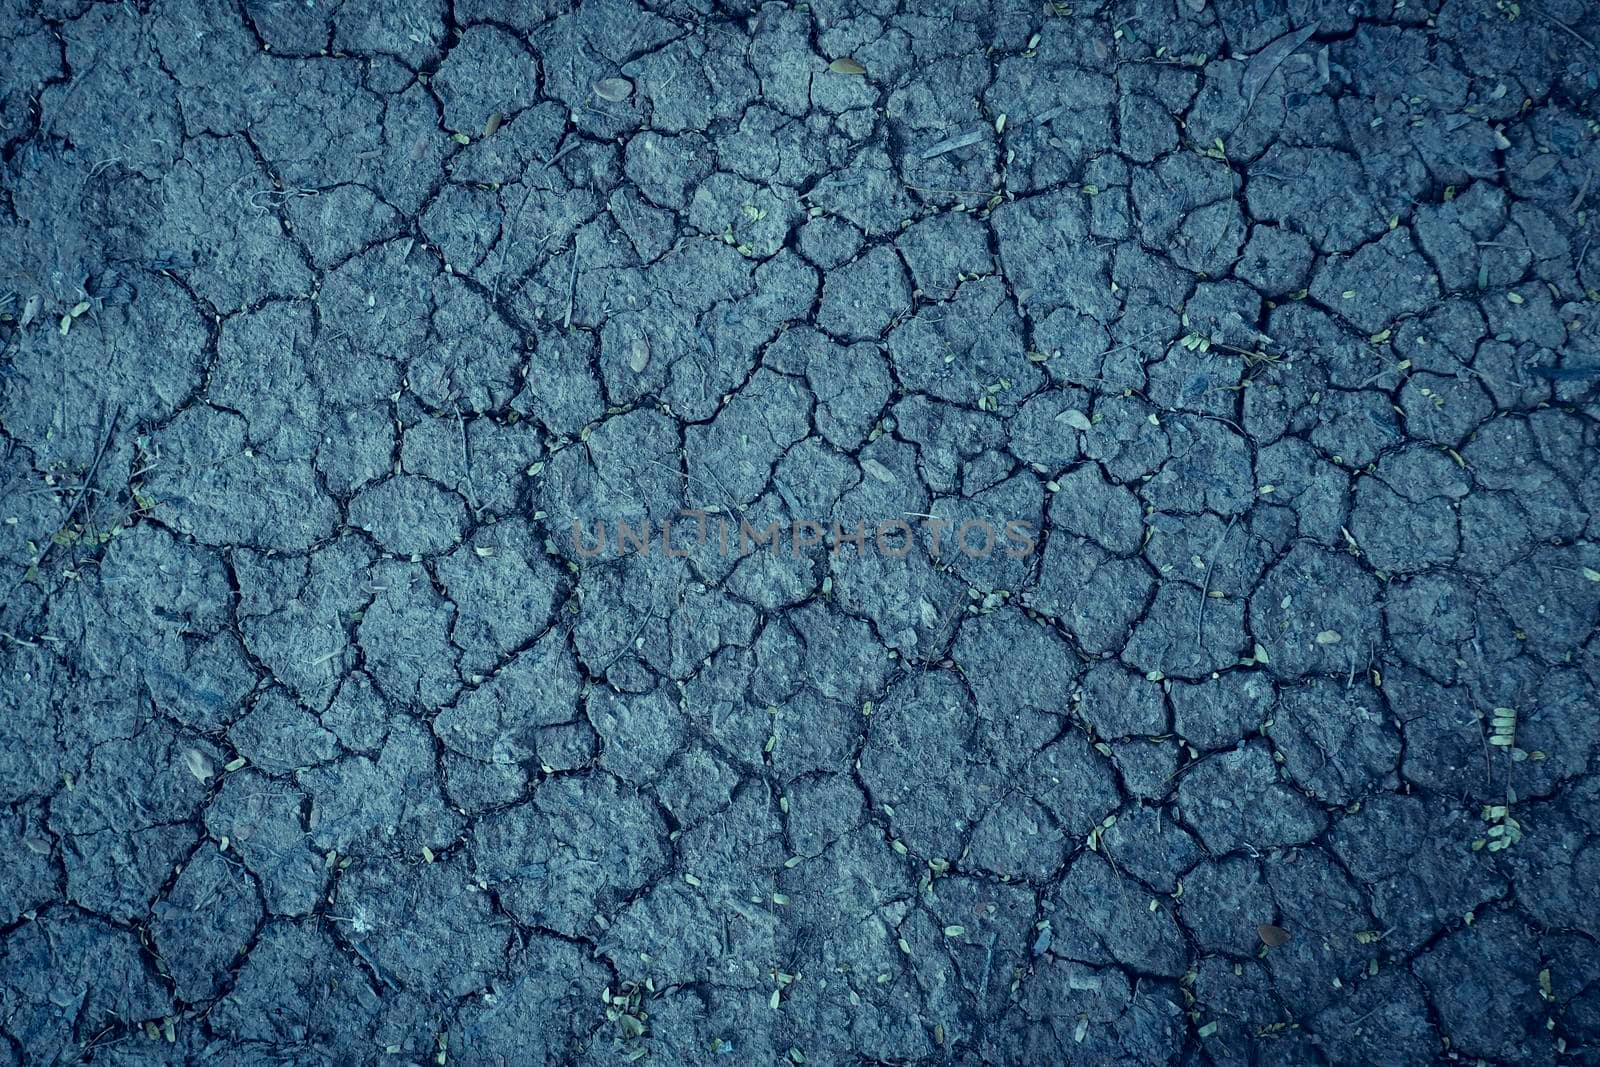 Cracked dry earth soil after no rain water longtime, abstract sad dry background by Petrichor